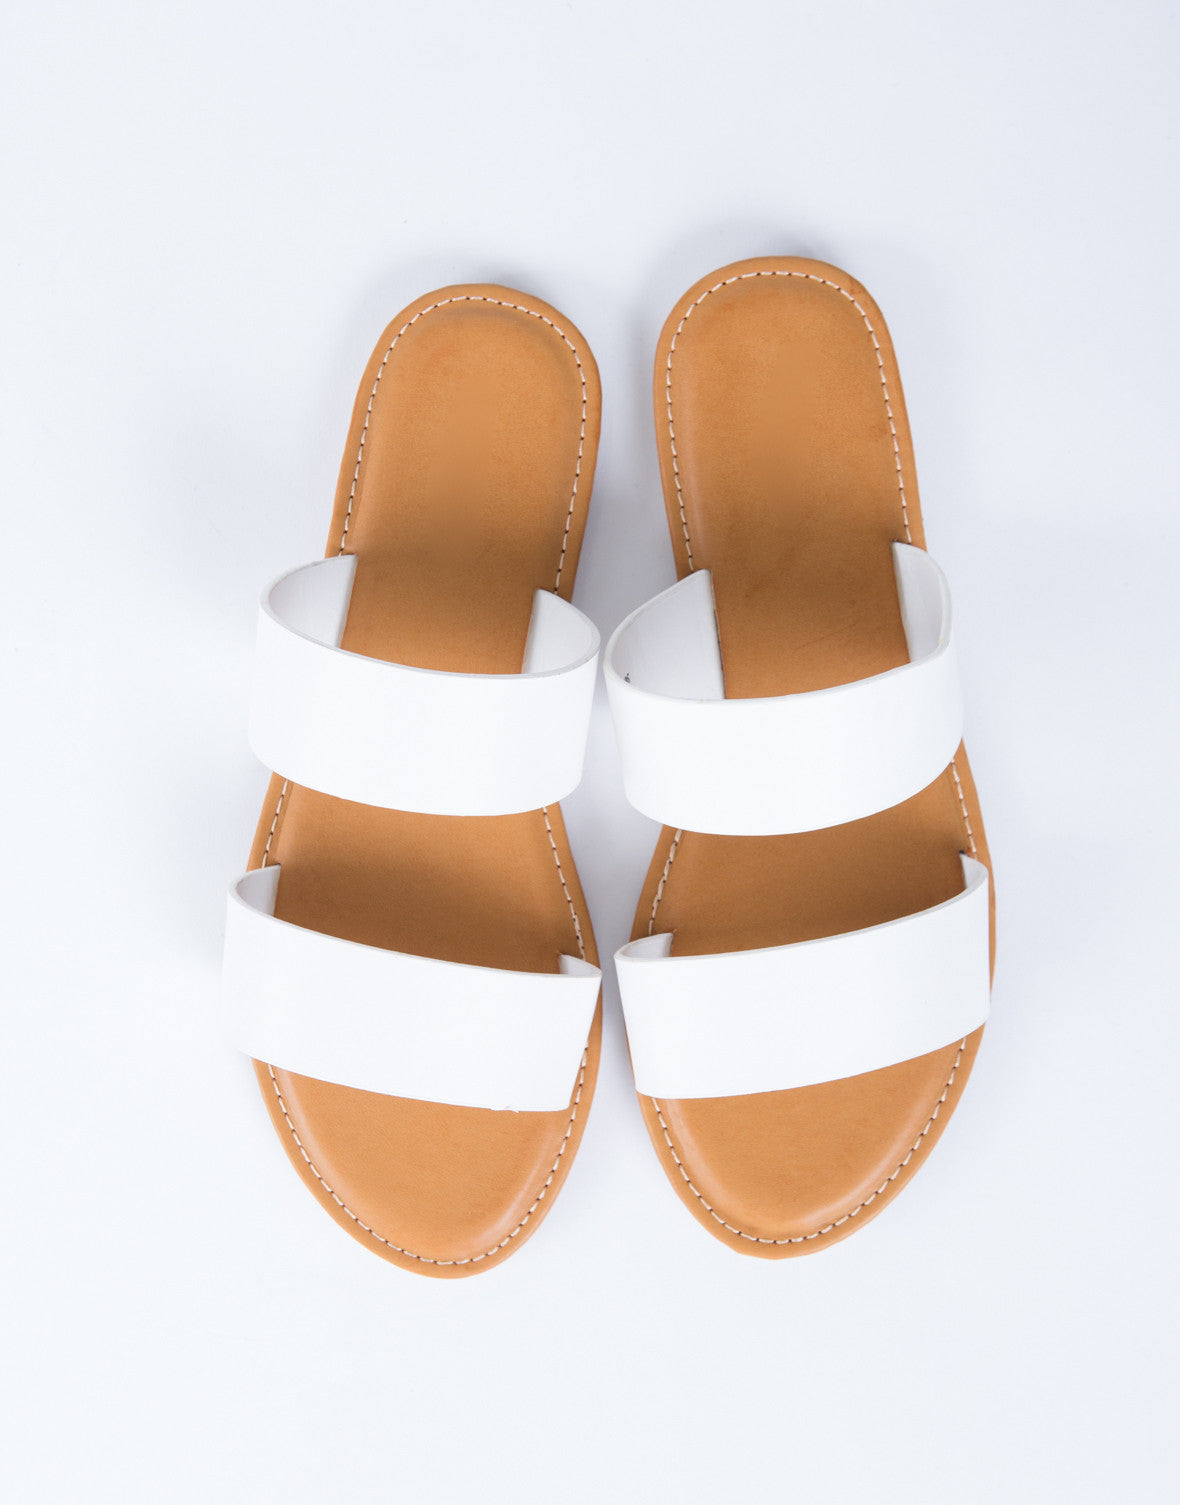 Double Banded Sandals - White Leather Sandals - Leather Sandal Slides ...